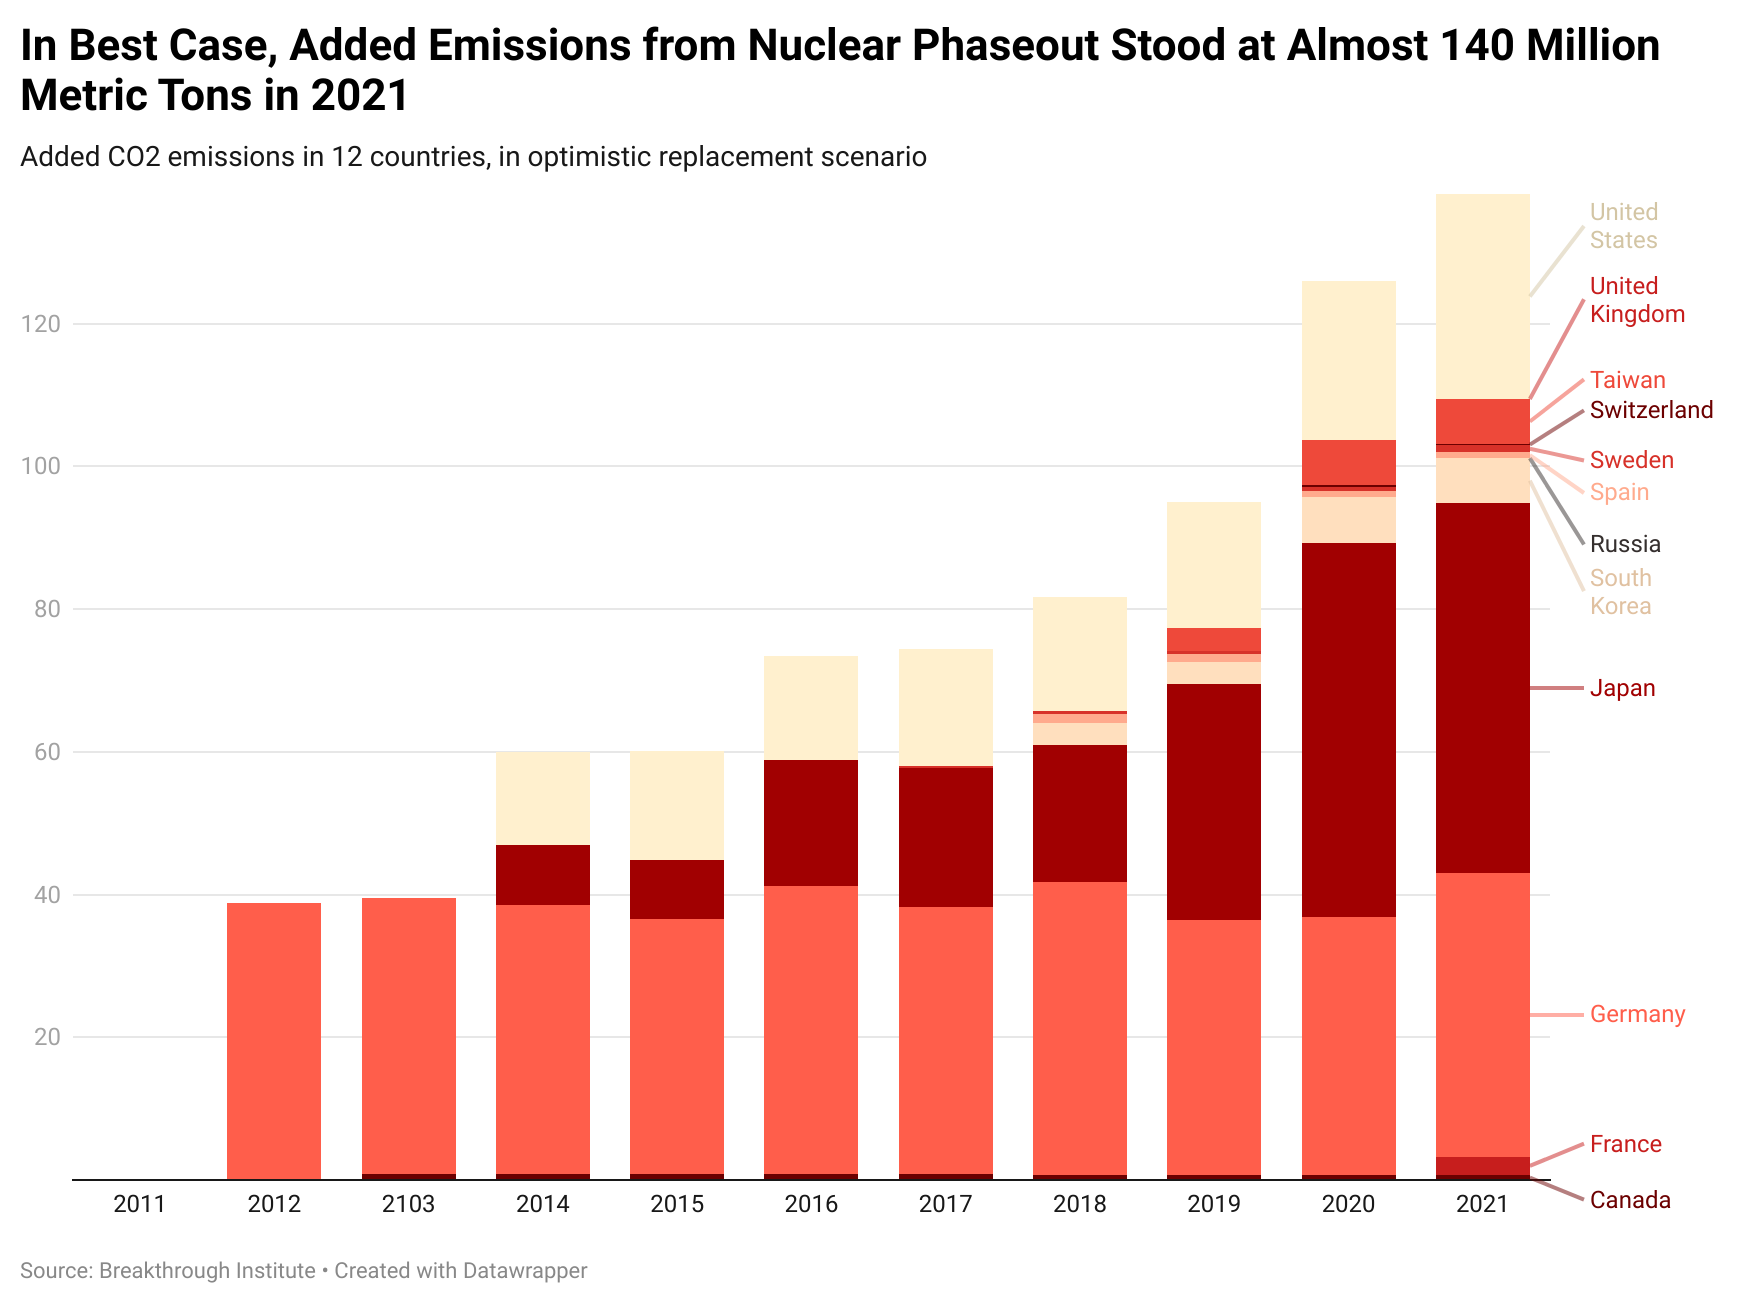 In Best Case, Added Emissions from Nuclear Phaseout Stood at Almost 140 Million Metric Tons in 2021